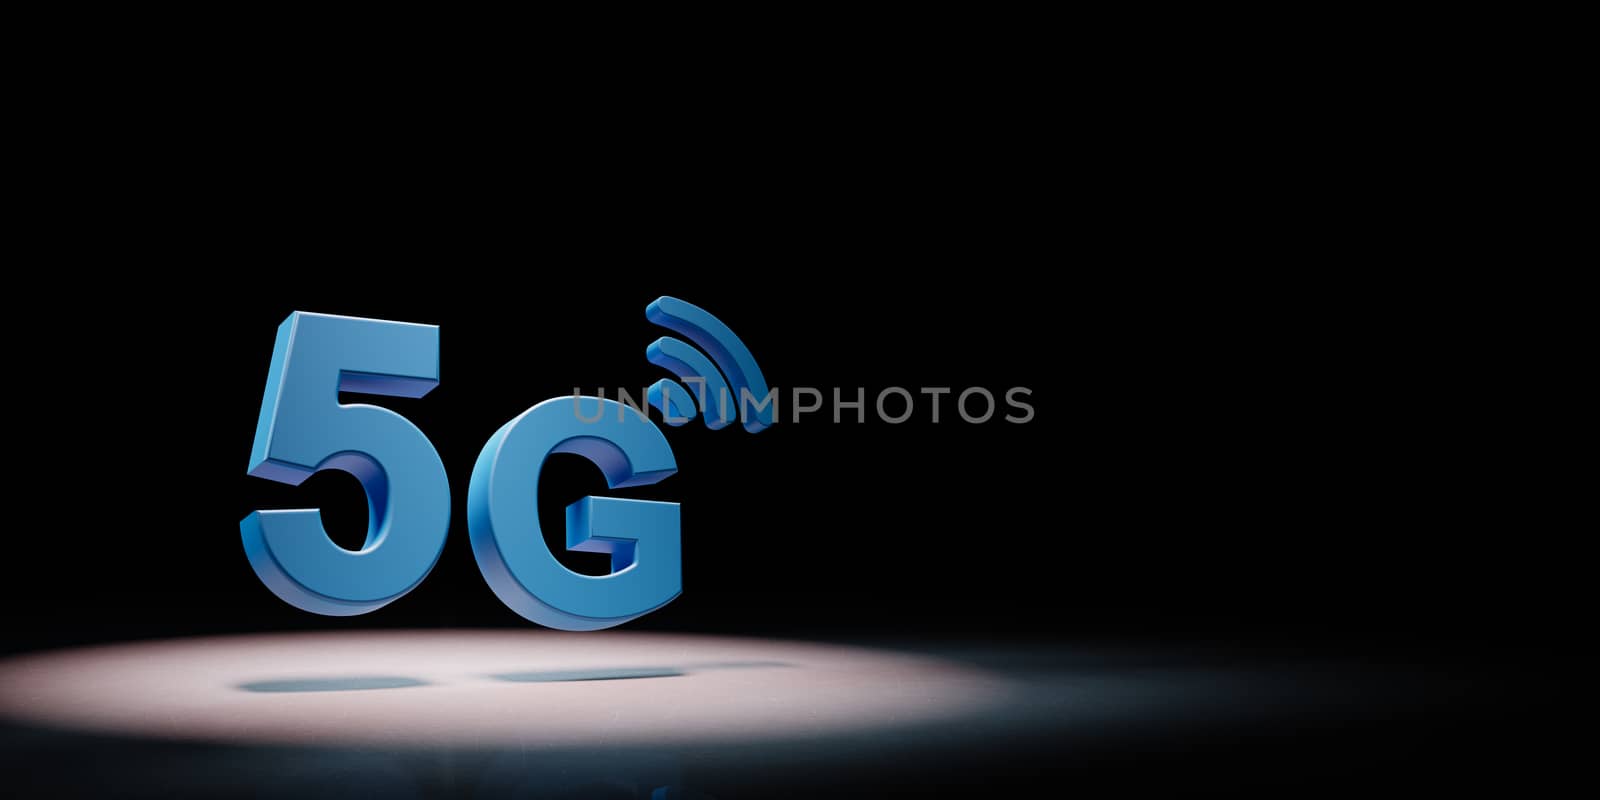 Blue 5G 3D Text Symbol Shape Spotlighted on Black Background with Copy Space 3D Illustration